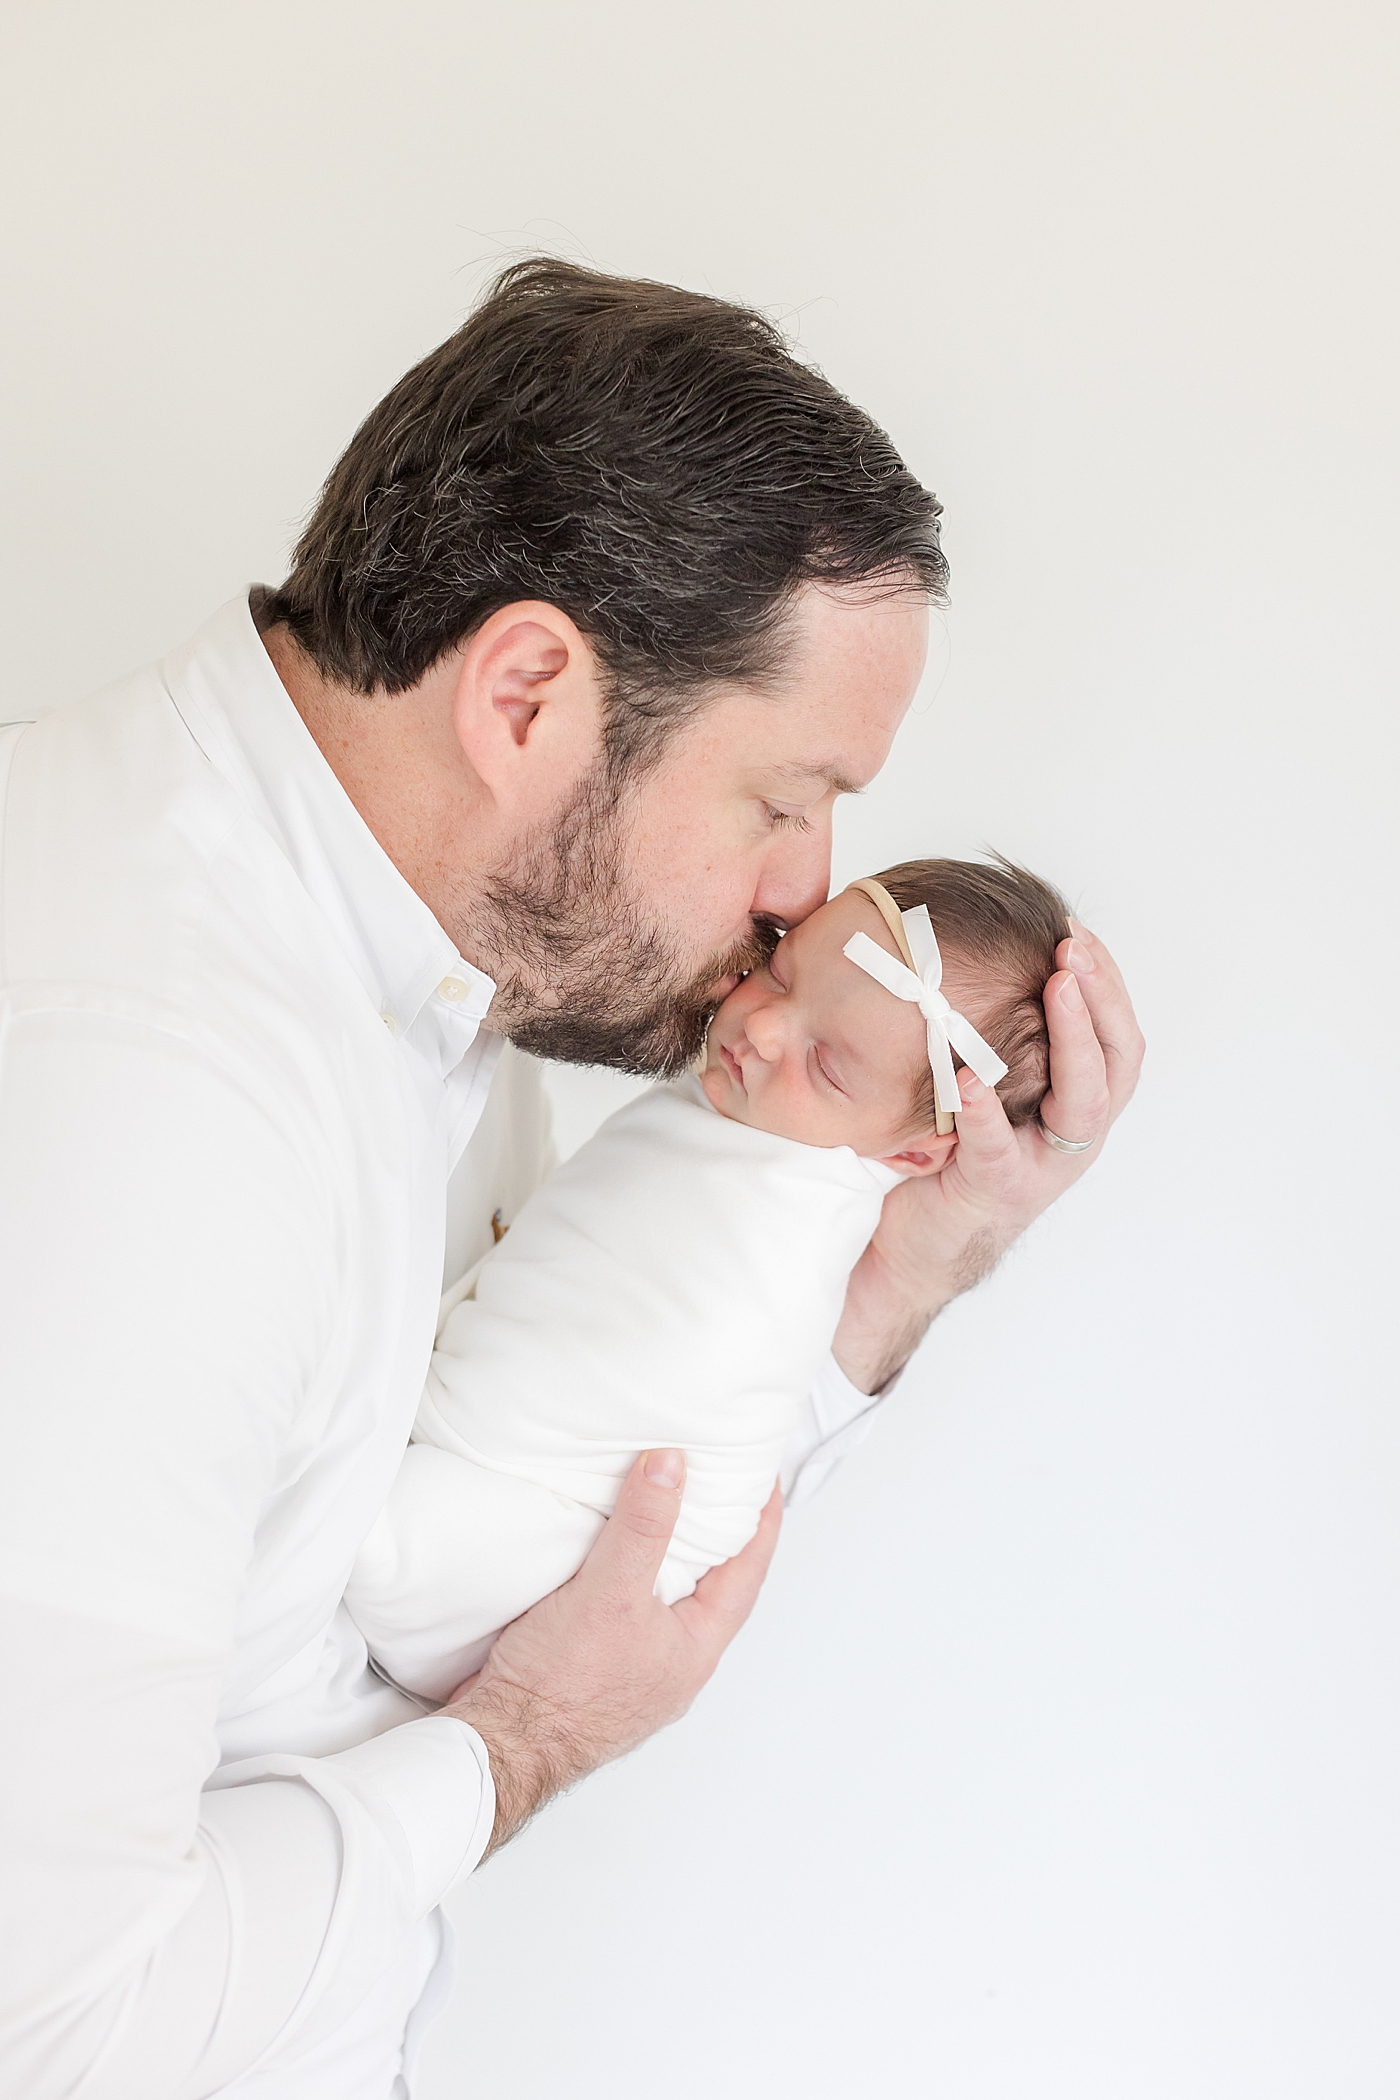 during their Studio newborn session with Family Photographer Emily Gerald in Arlington VA